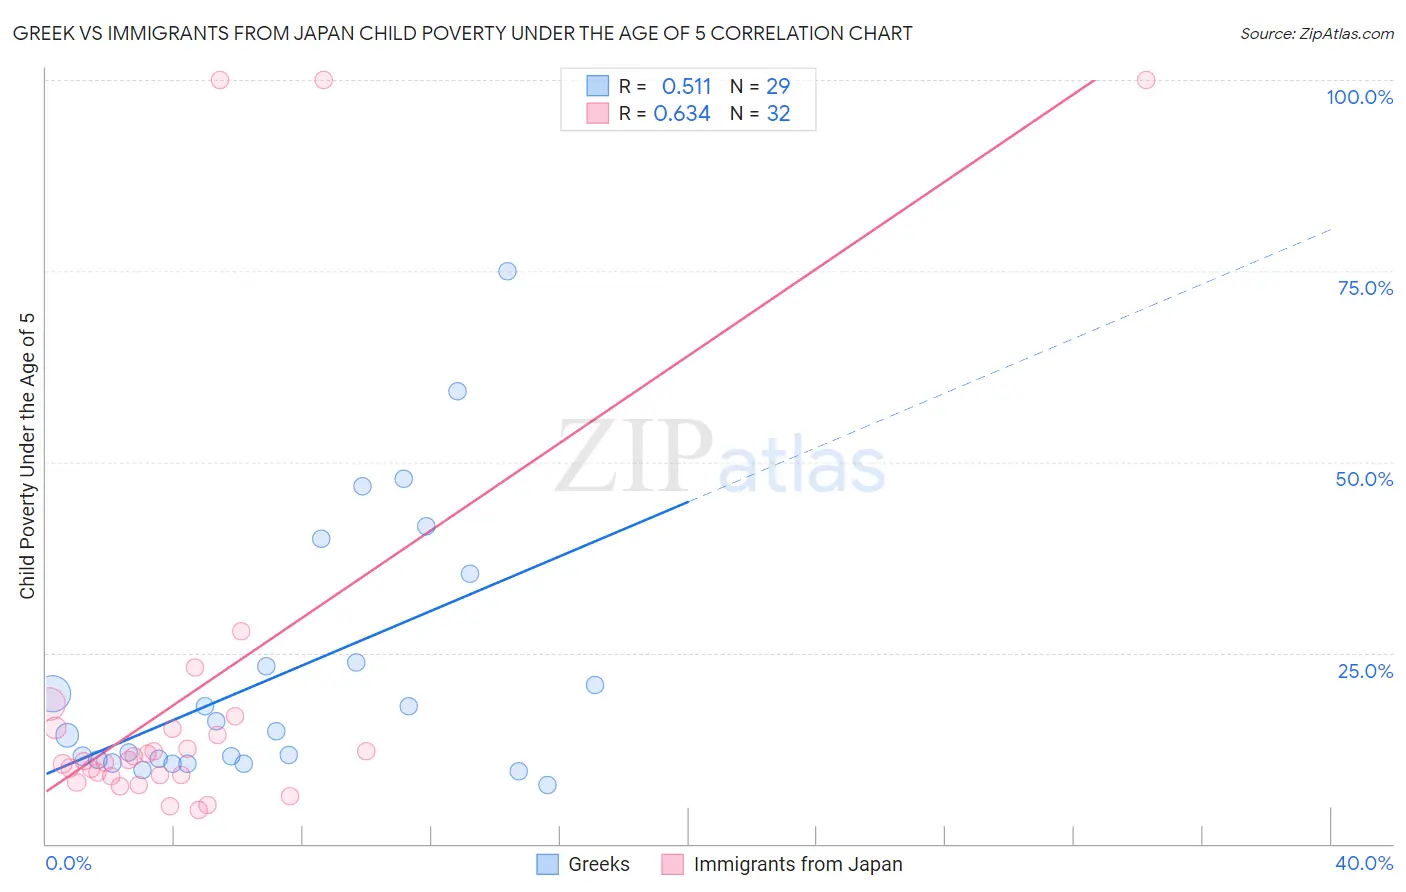 Greek vs Immigrants from Japan Child Poverty Under the Age of 5